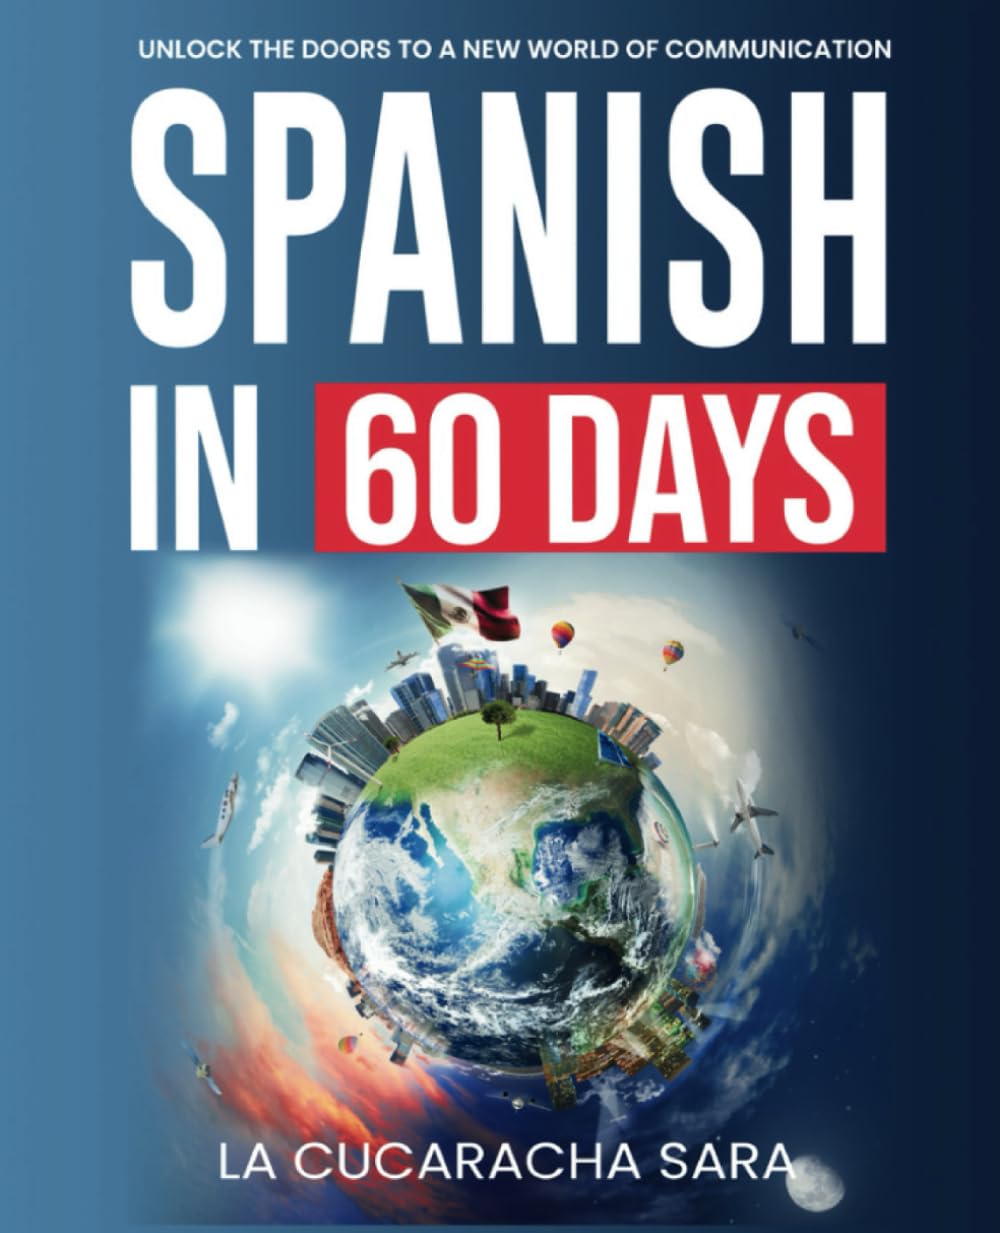 Spanish in 60 Days: The Language Learning Workbook to Help You Speak Just Like the Locals With Common Slang Words and Phrases, Conversation Starters, and Grammar Rules to Live By!